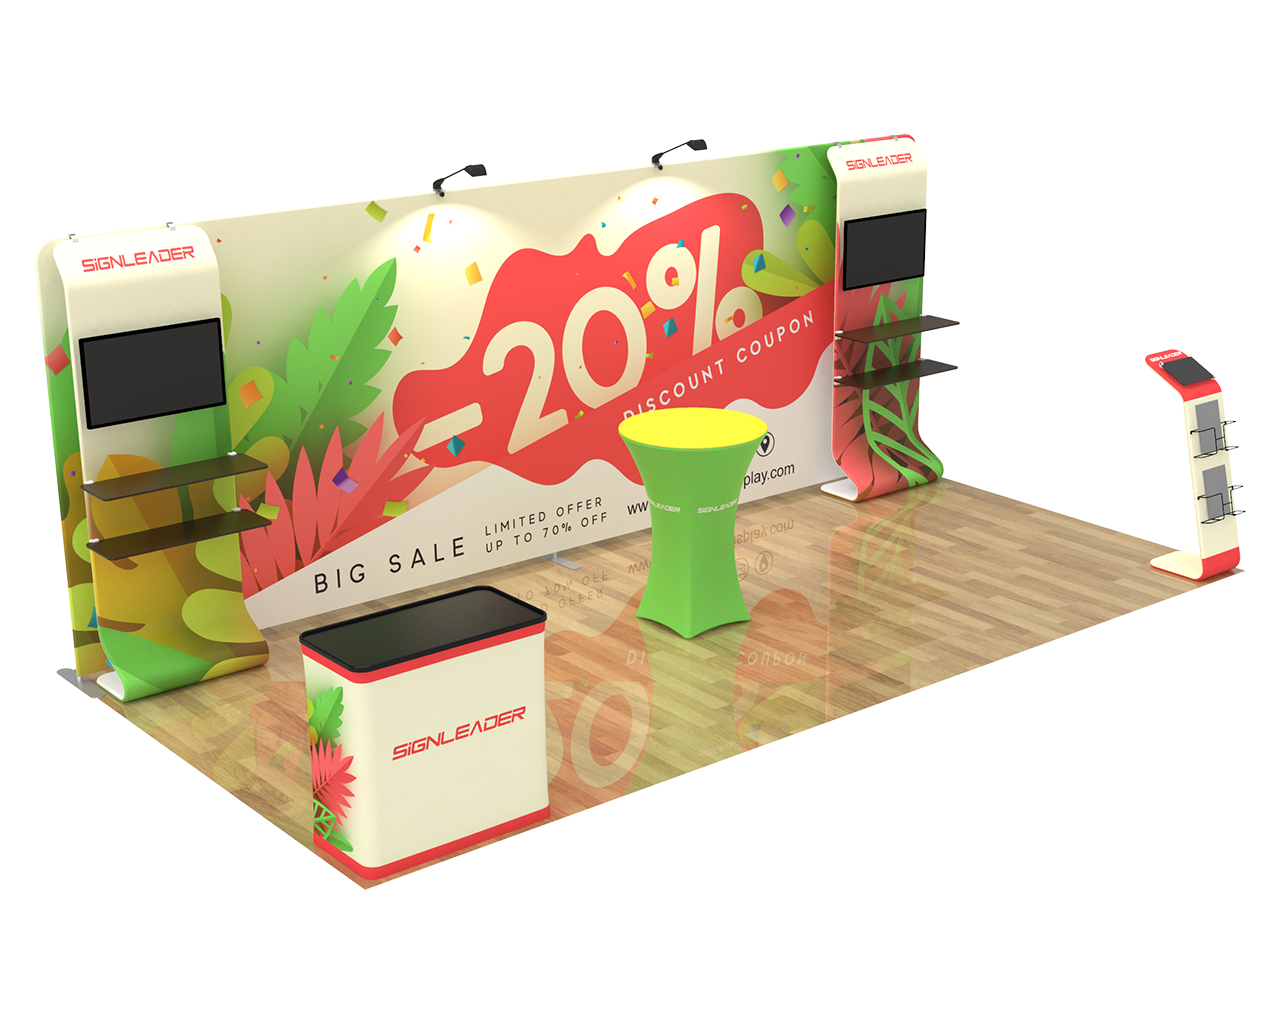 20ft custom trade show display booth kits with counter light roll up banner